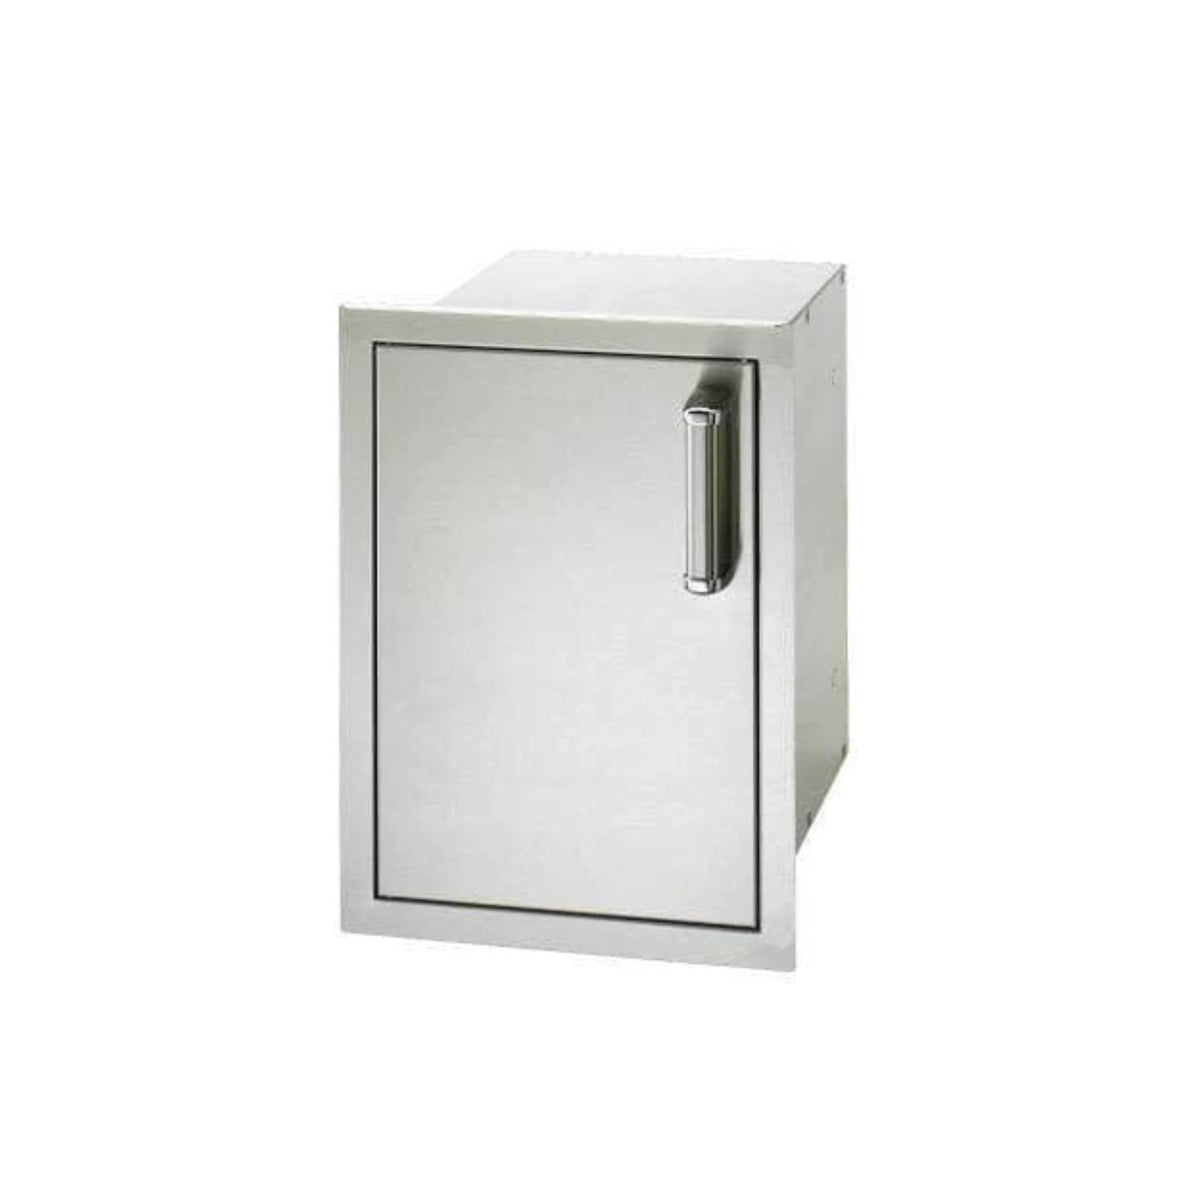 Fire Magic-Single Door With Dual Drawers 53820SC